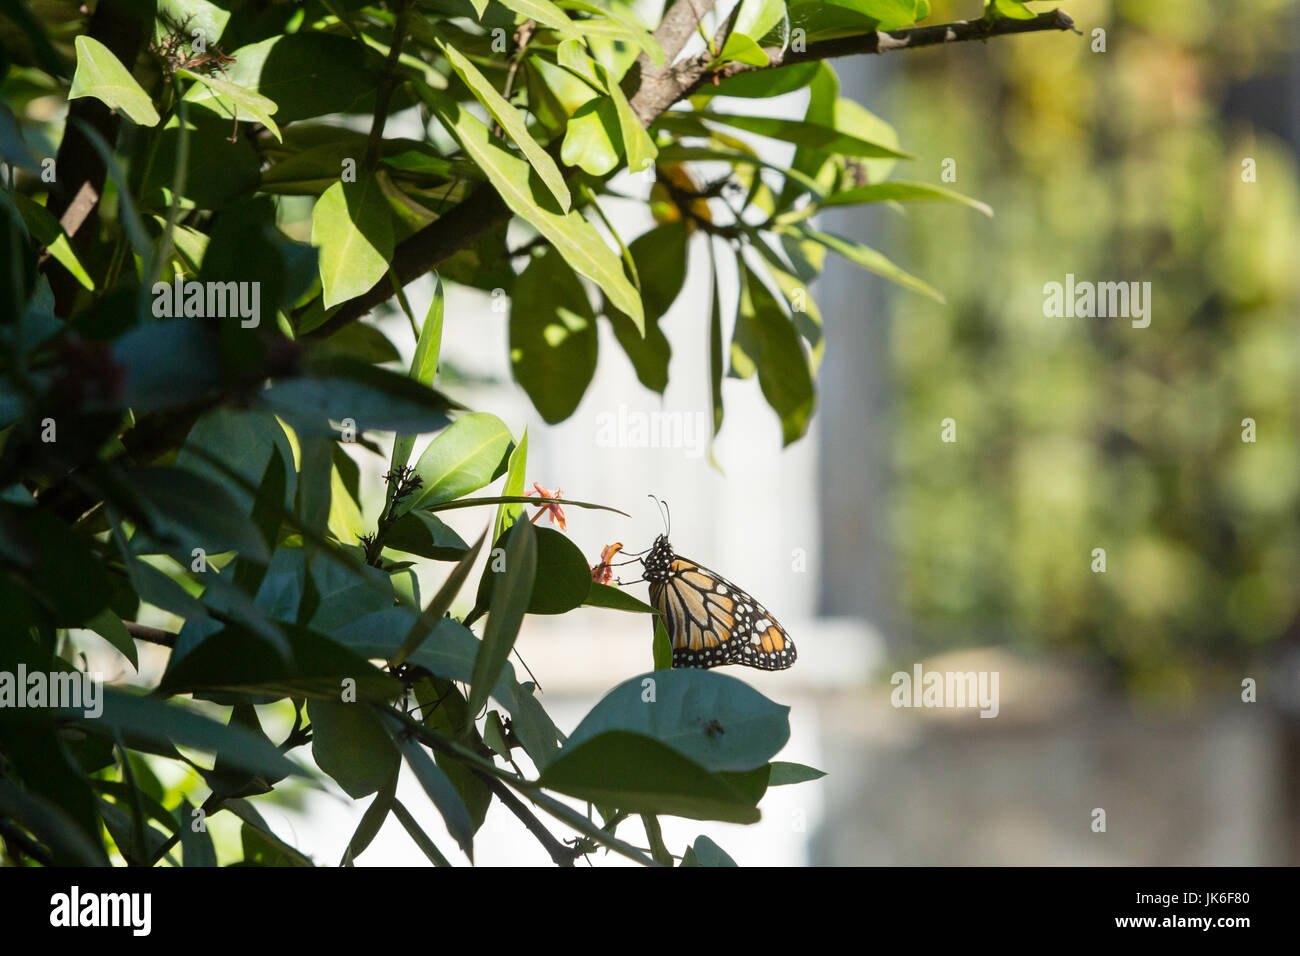 A Southern monarch (Danaus erippus) butterfly enjoys the sunshine while takes a rest on a Ixora plant during sunny afternoon in Asuncion, Paraguay. Stock Photo